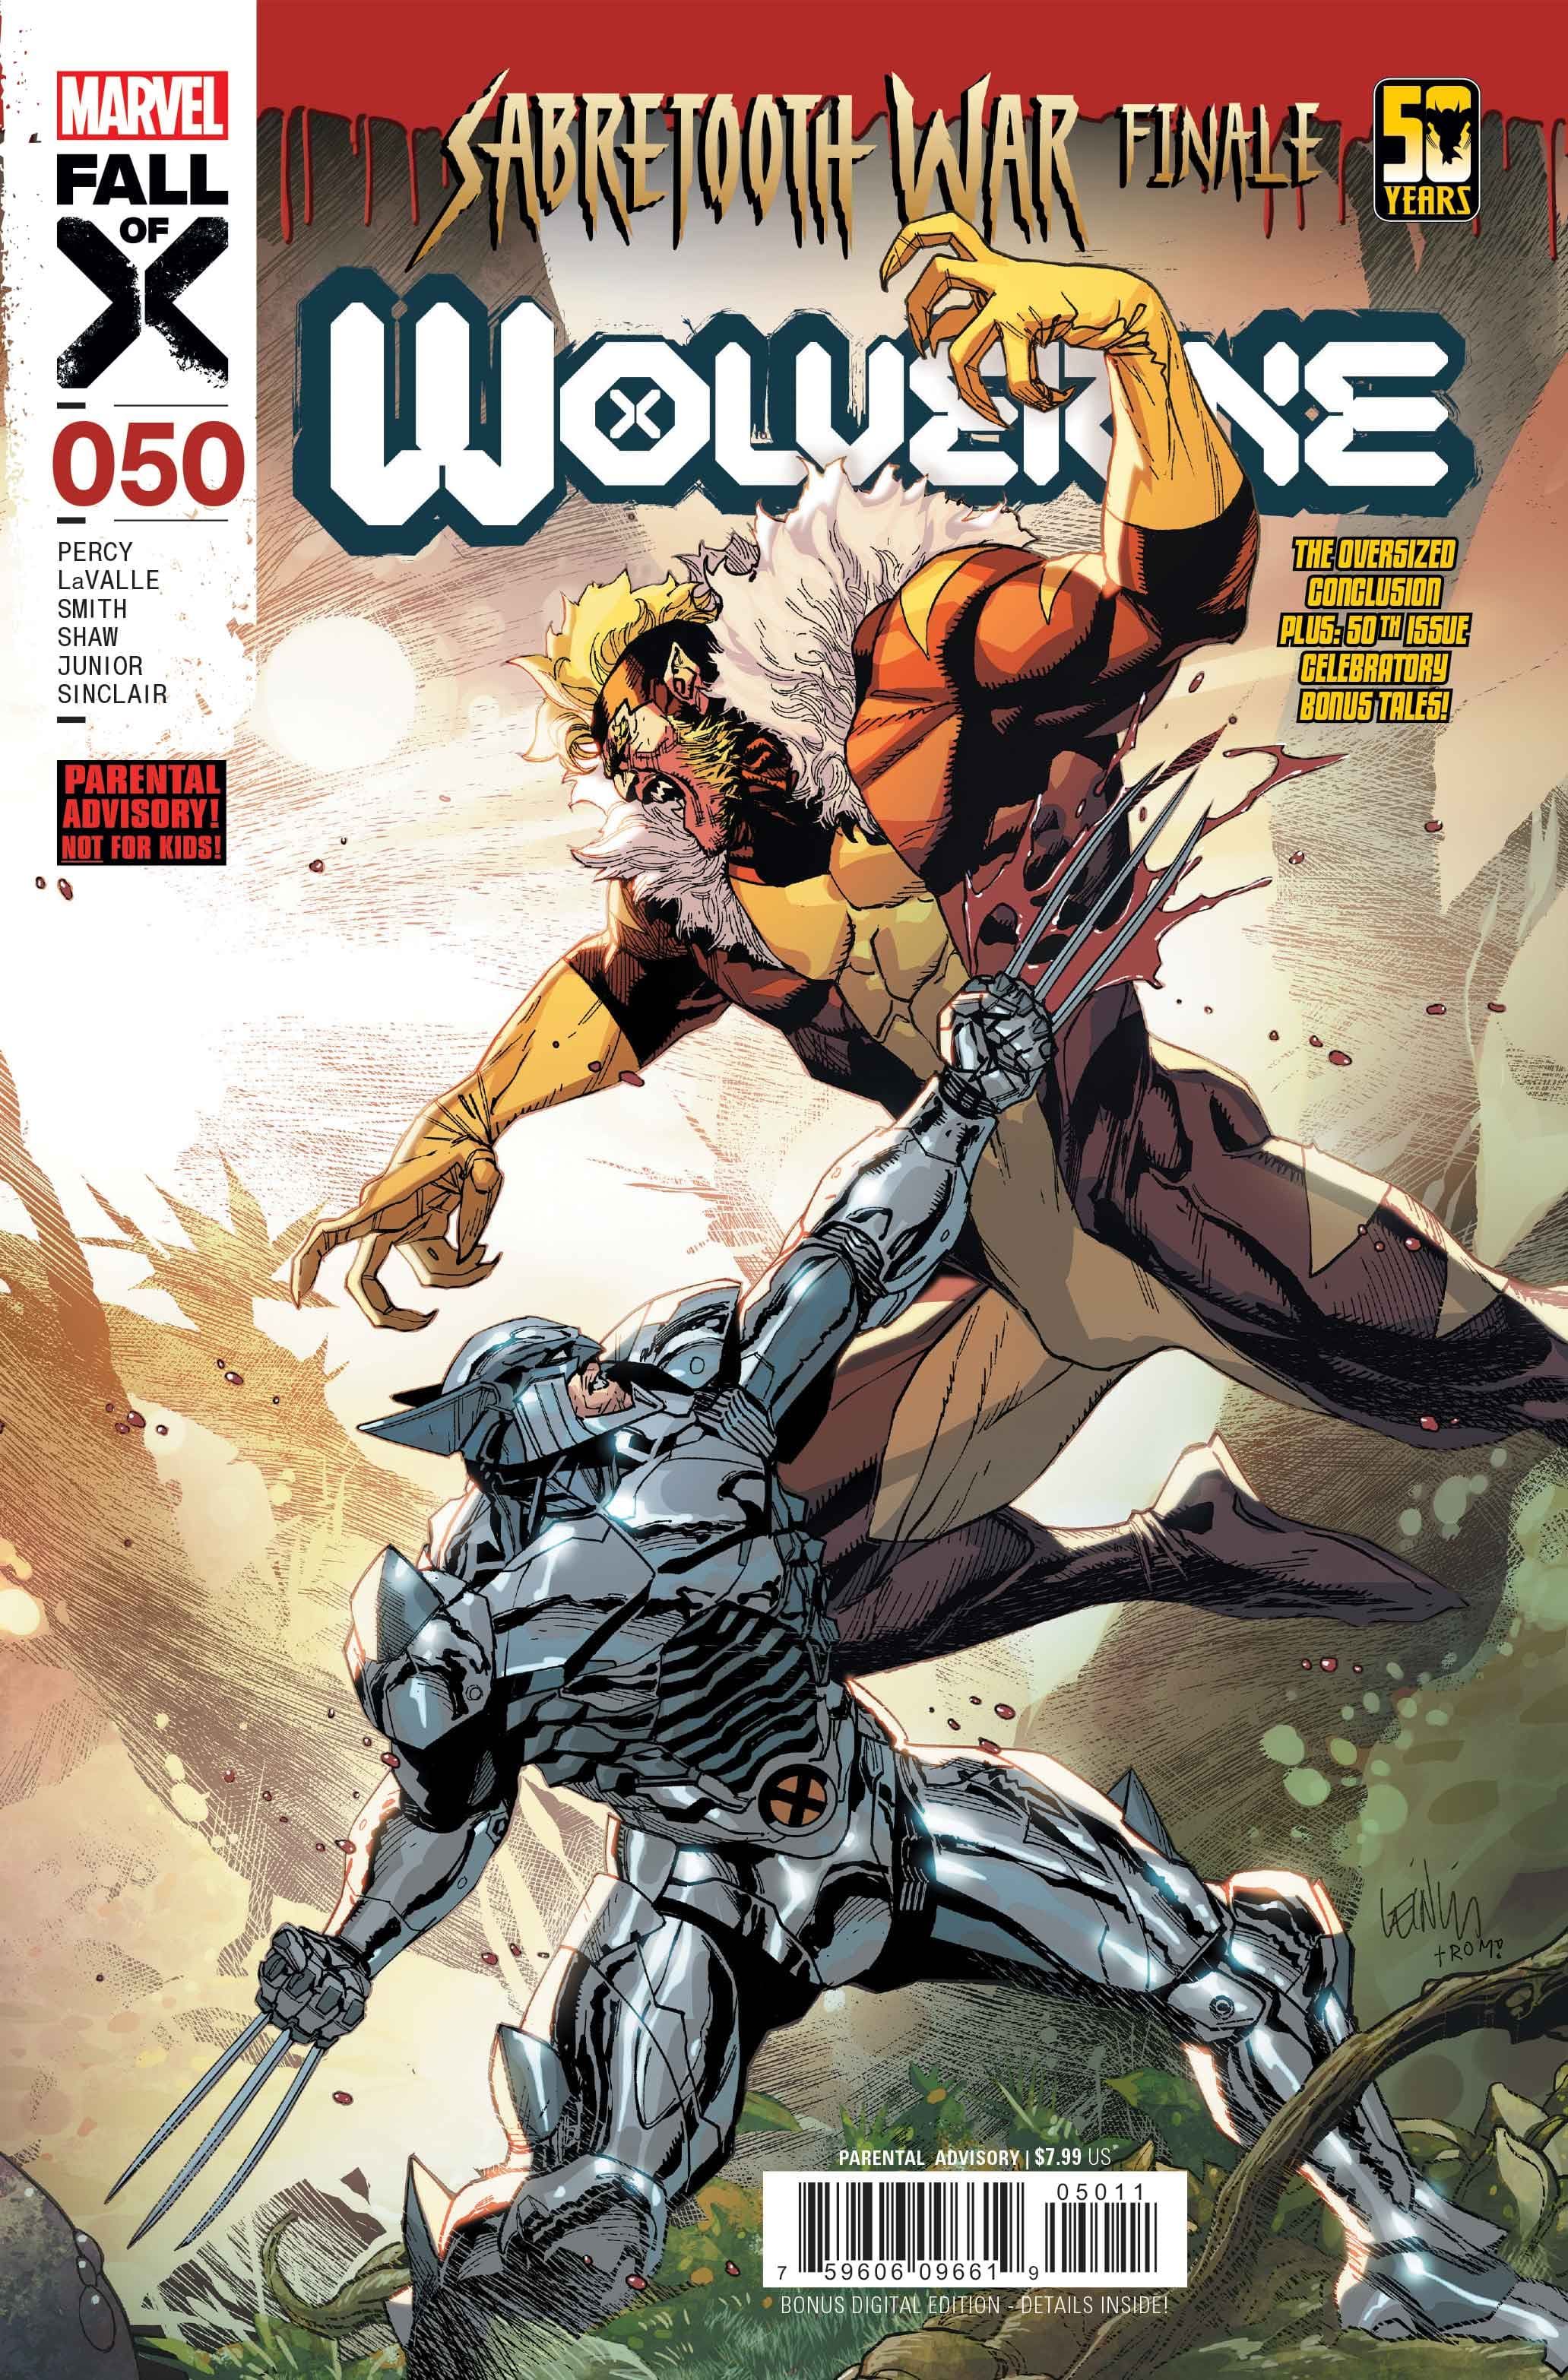 First Look: Wolverine Heads into Final Battle for Milestone Anniversary